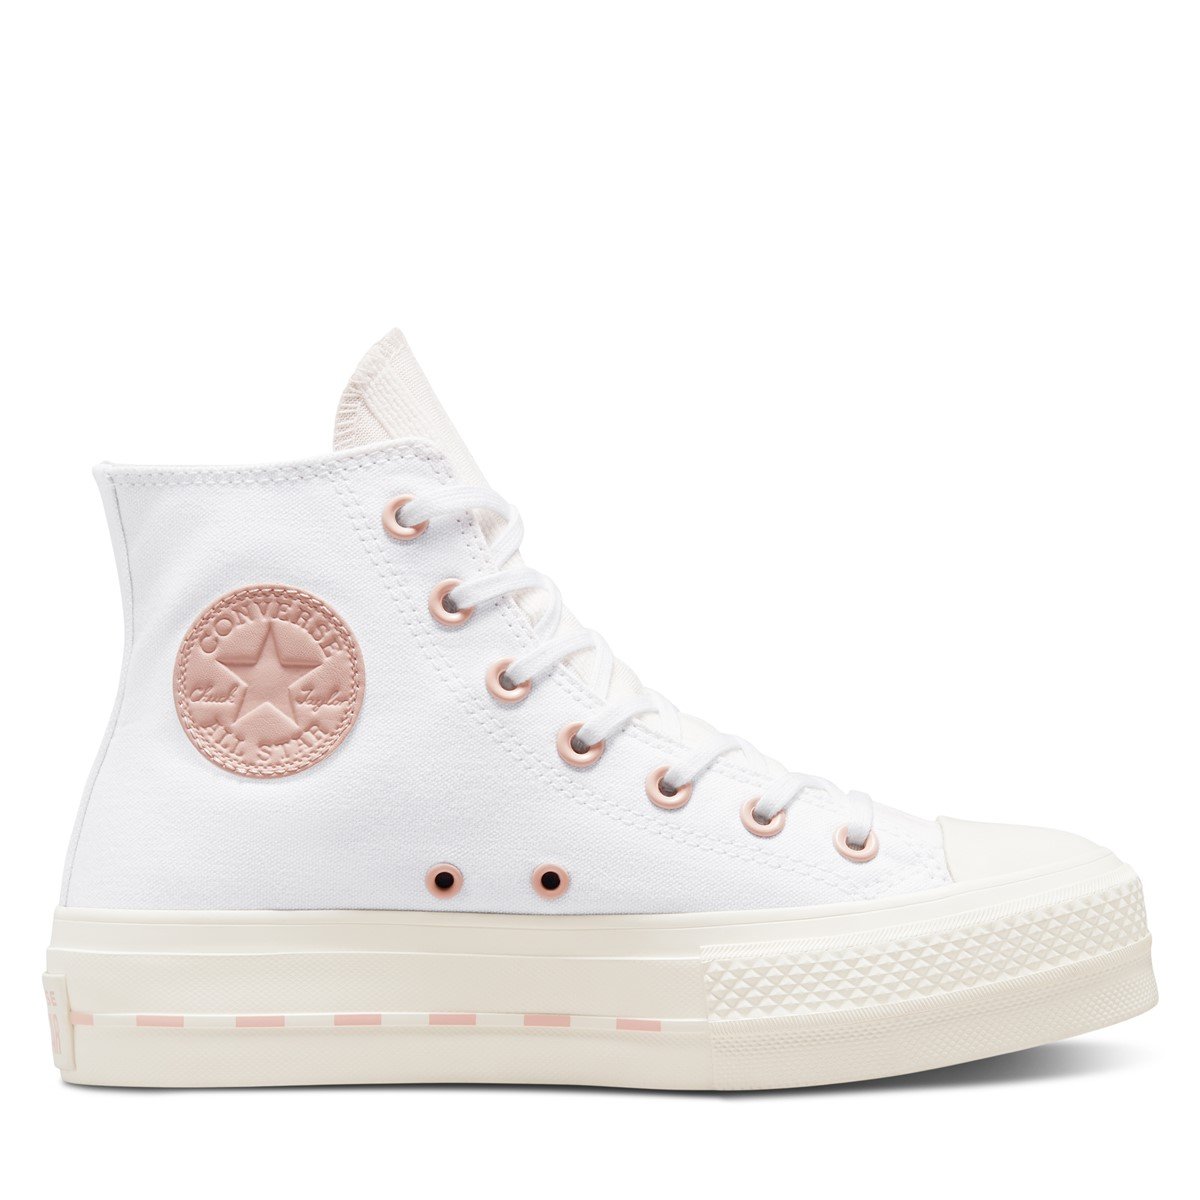 Women's Chuck Taylor All Star Crafted Canvas Lift Platform Hi Sneakers in  White/Pink حبة داخل العين